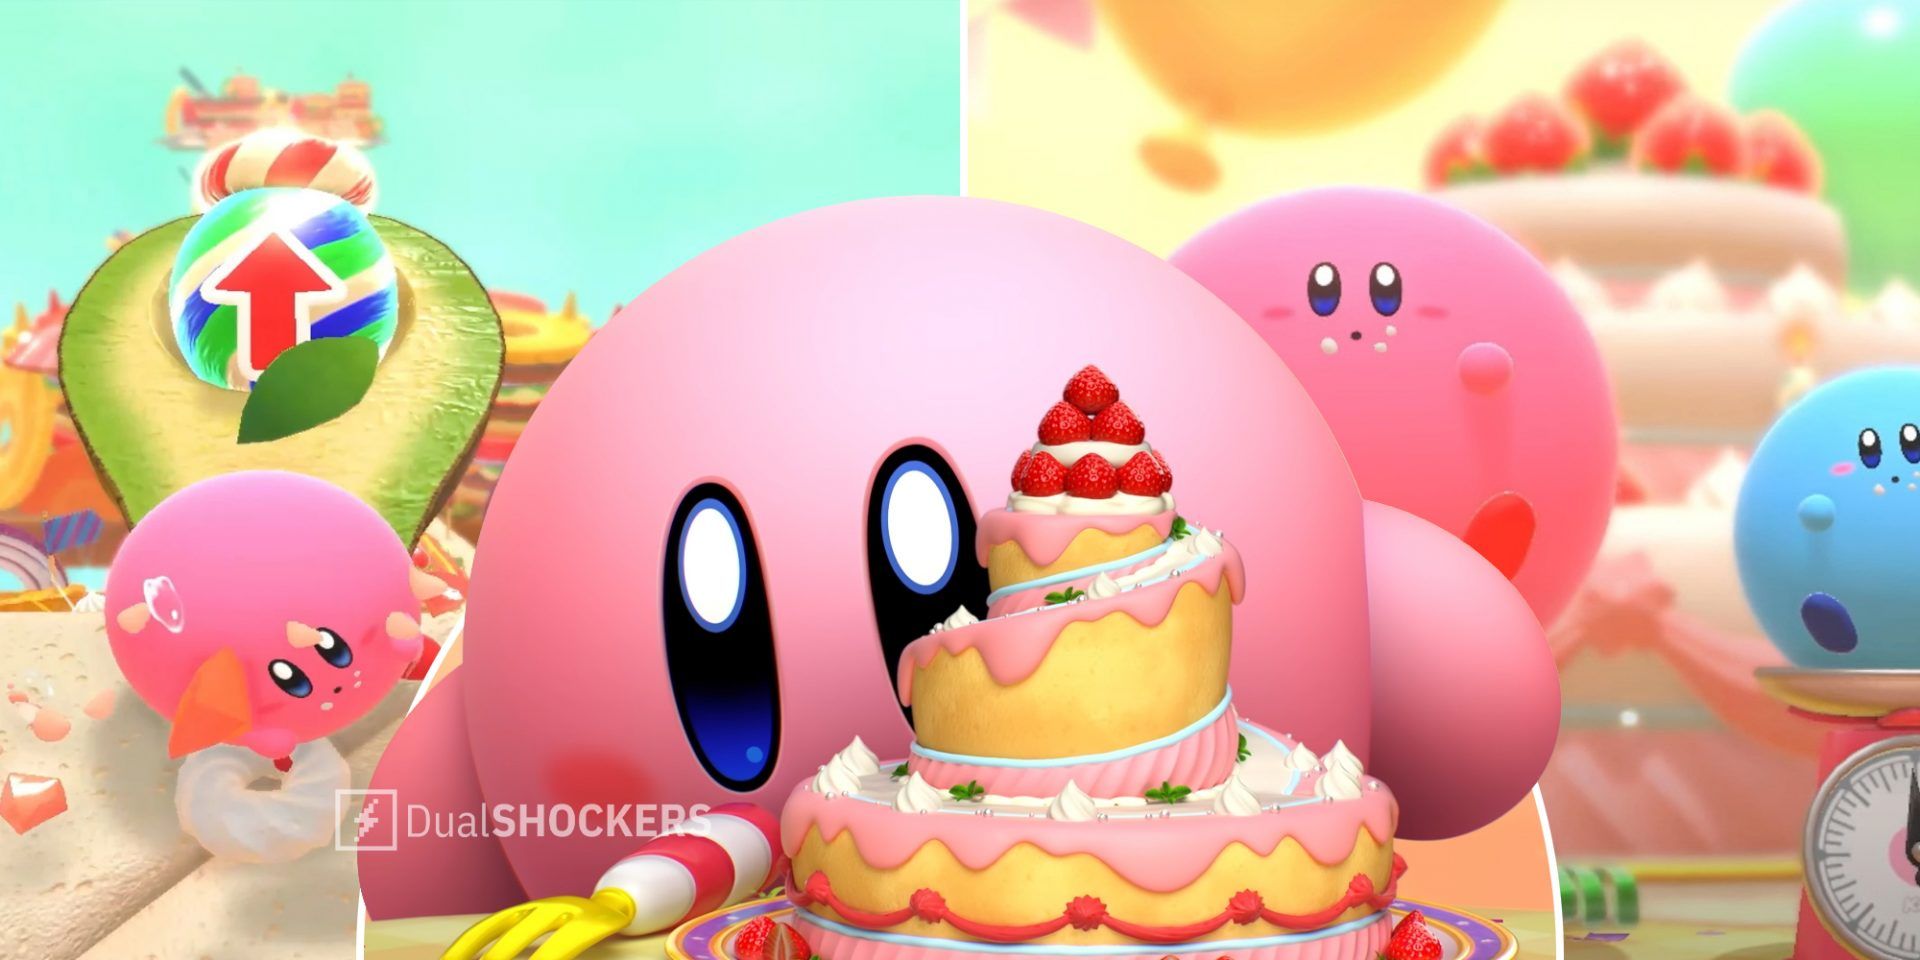 Kirby rolling on track on left, Kirby's Dream Buffet promo image Kirby with cake in middle, Kirby at end of race on right